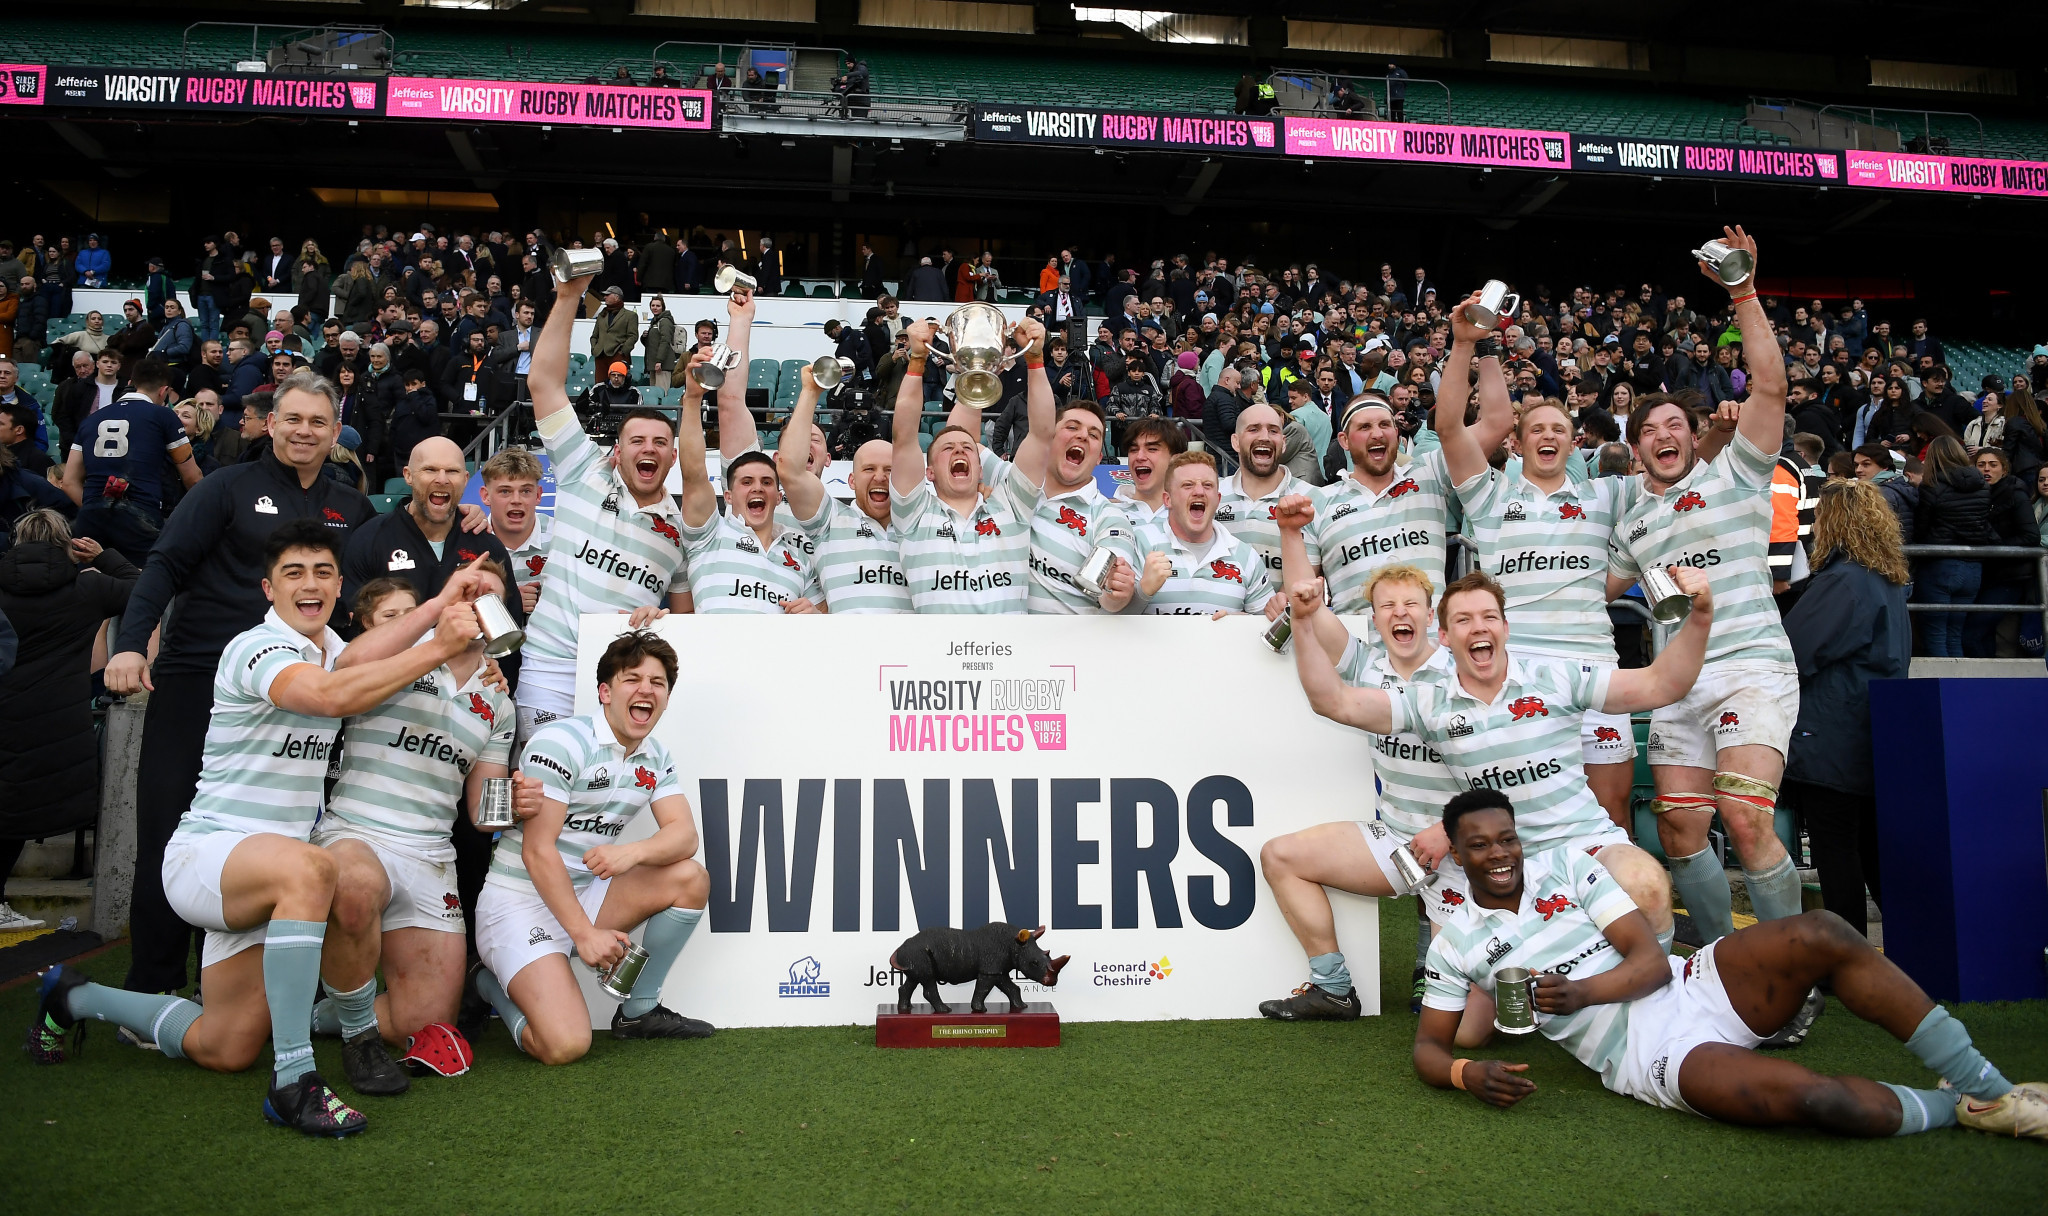 Cambridge defeated Oxford to win the men's Varsity Match title at Twickenham Stadium ©Getty Images